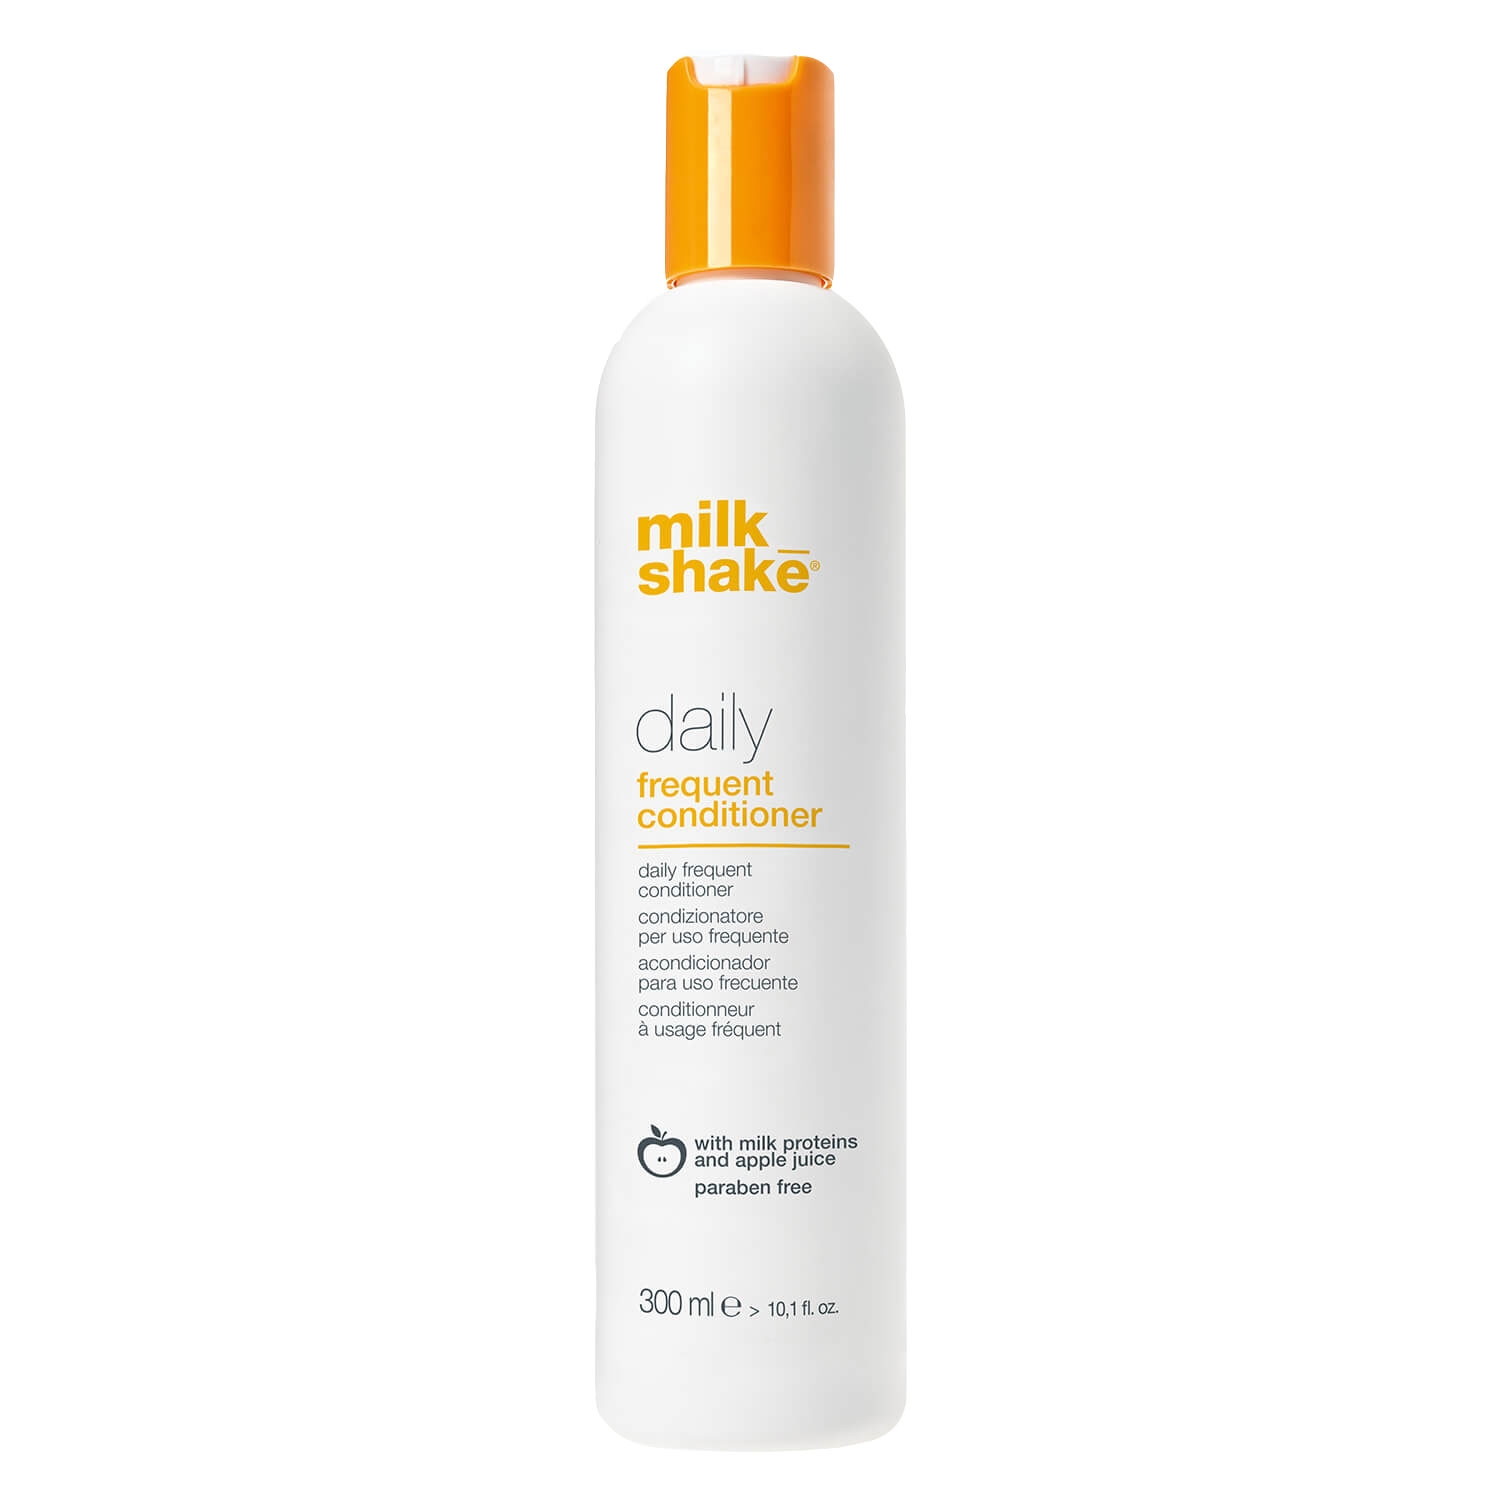 Product image from milk_shake daily - conditioner